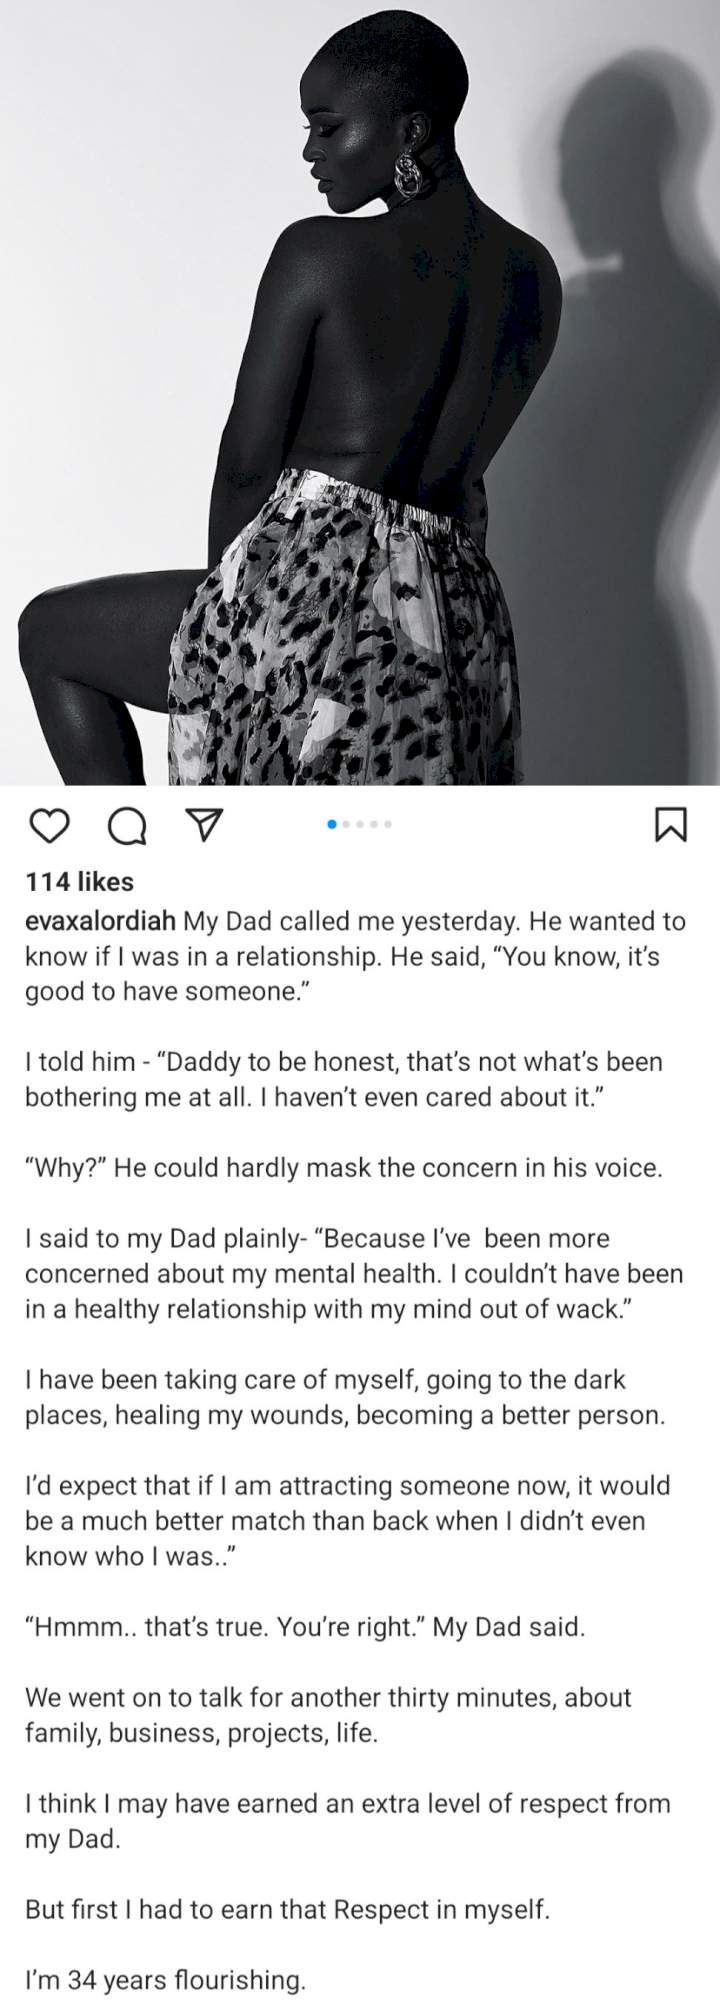 Eva Alordiah shares topless photo as she reveals conversation she had with her father about her relationship status